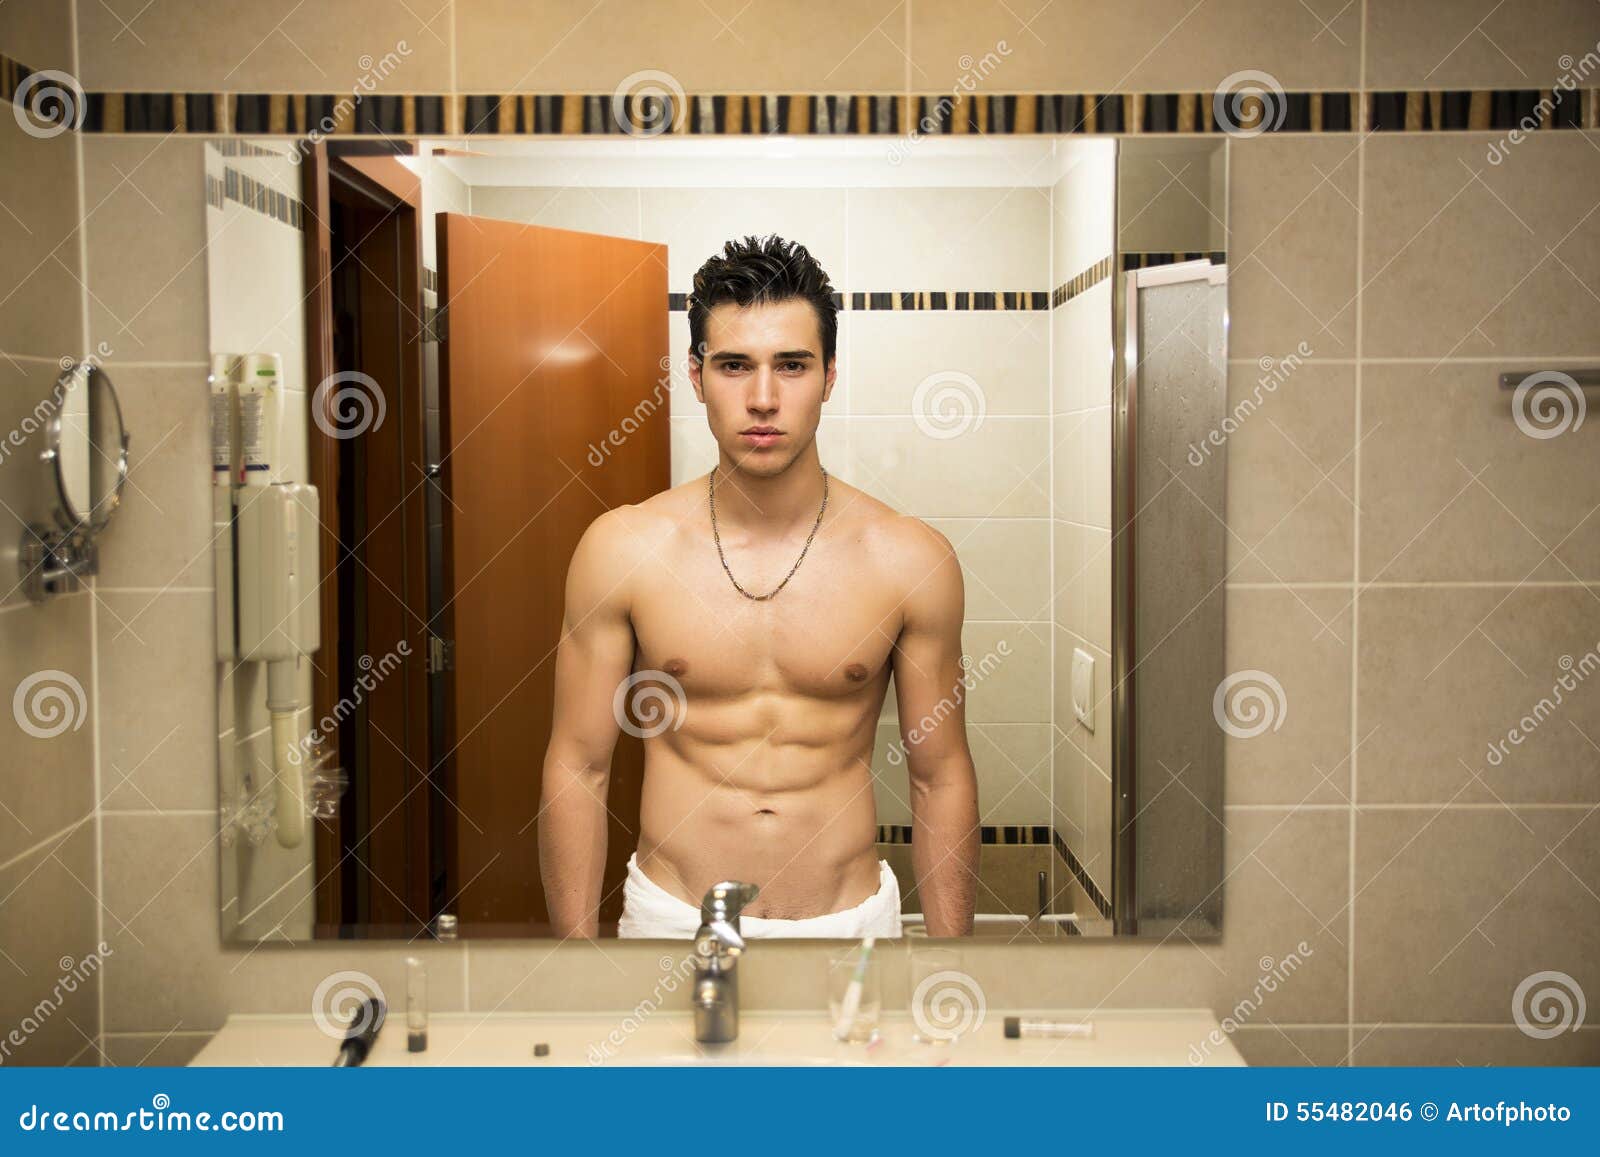 Shirtless Handsome Young Man In Bathroom Stock Photo Image Of